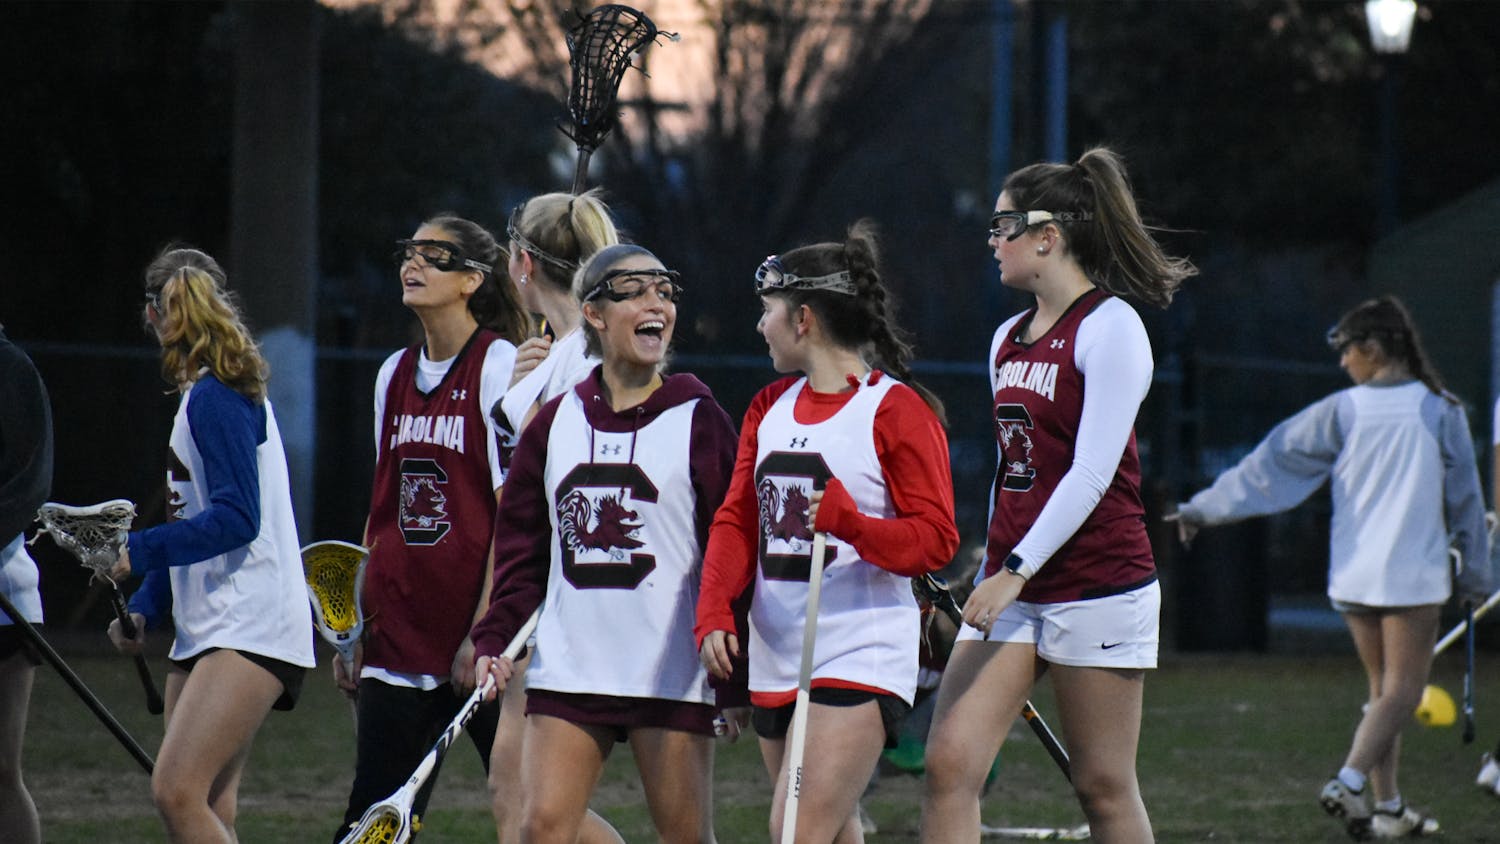 The women’s lacrosse club takes a break during practice on Jan. 24, 2023. The club was preparing to play its next game against Auburn on Jan. 28, 2023.